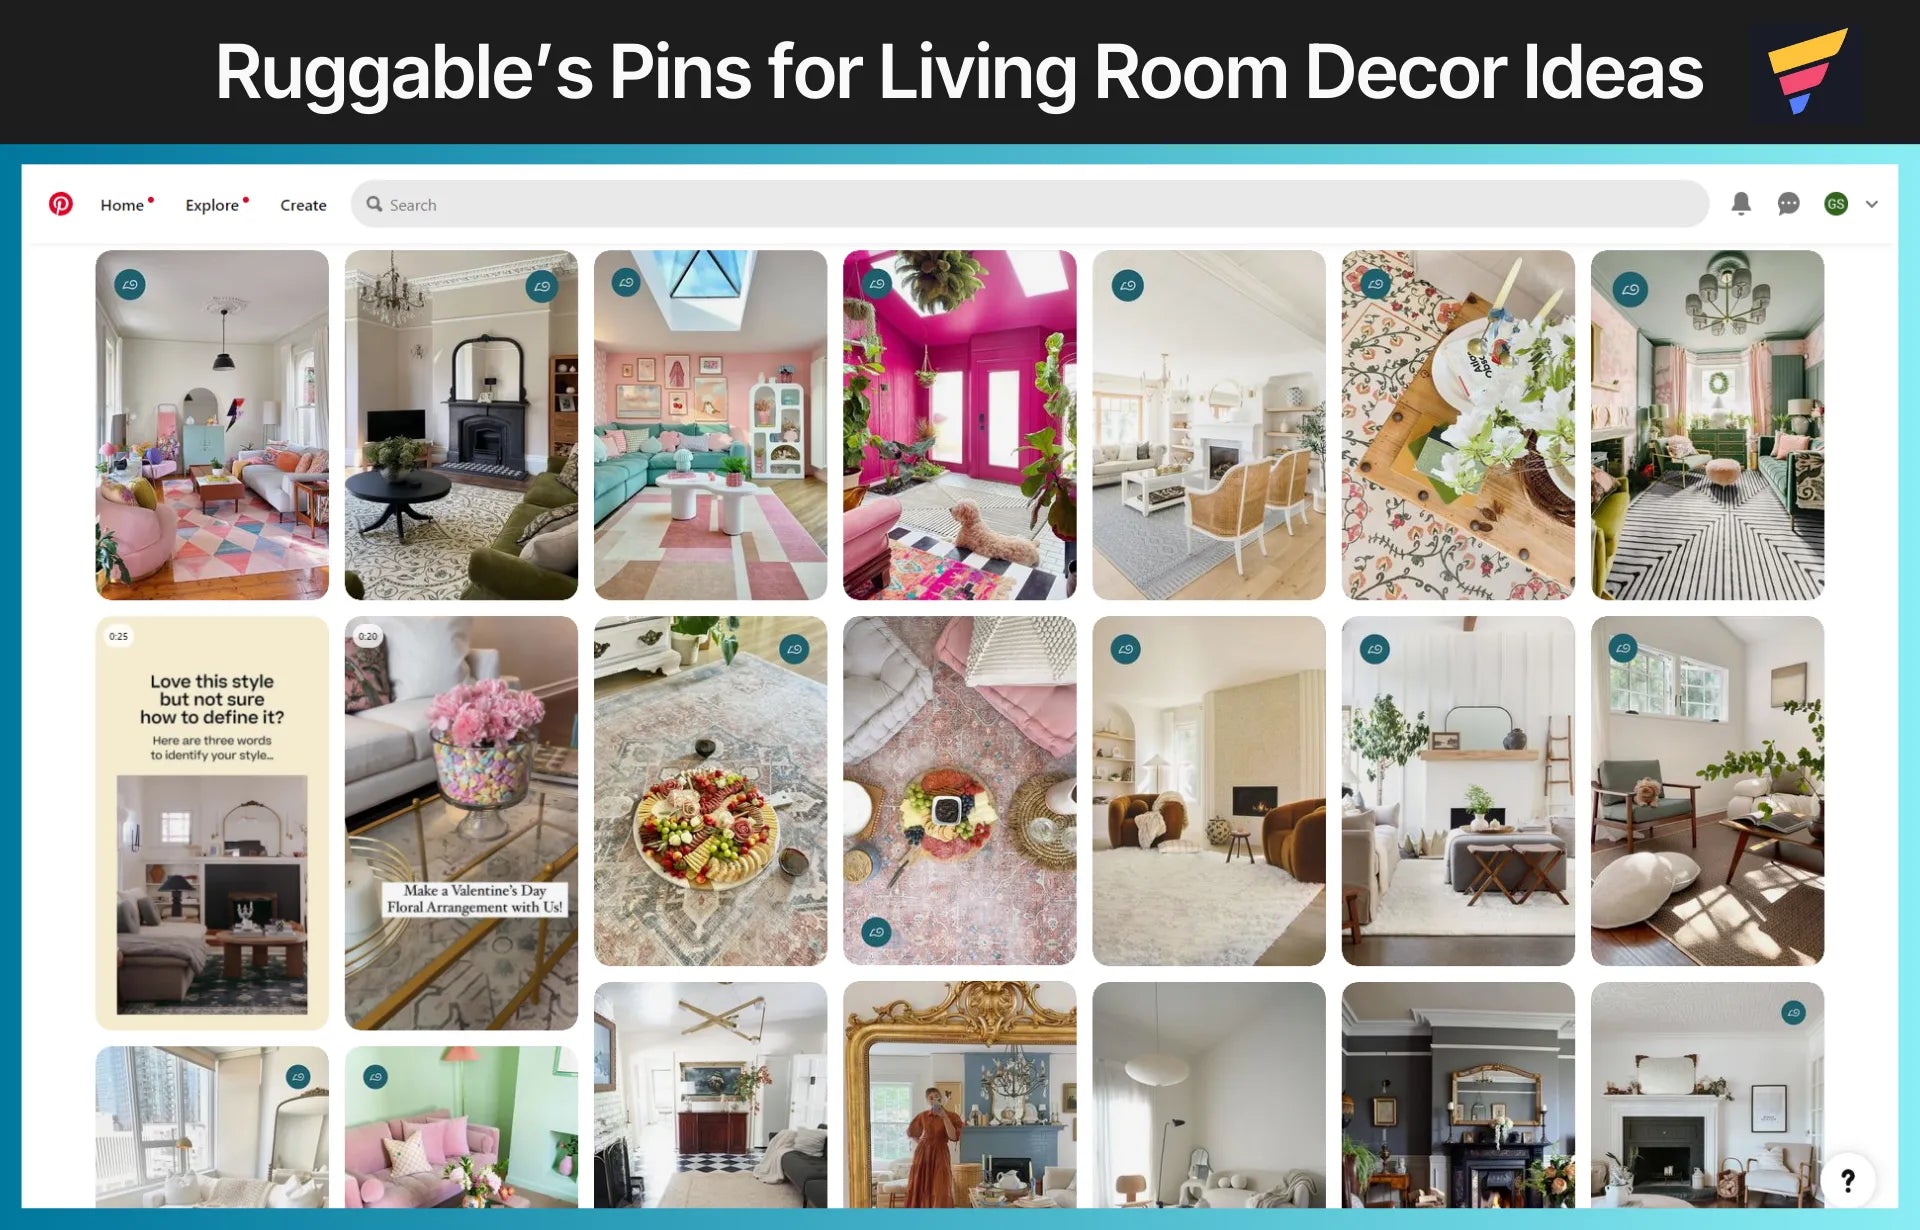 Ruggable’s Pins for Living Room Decor Ideas